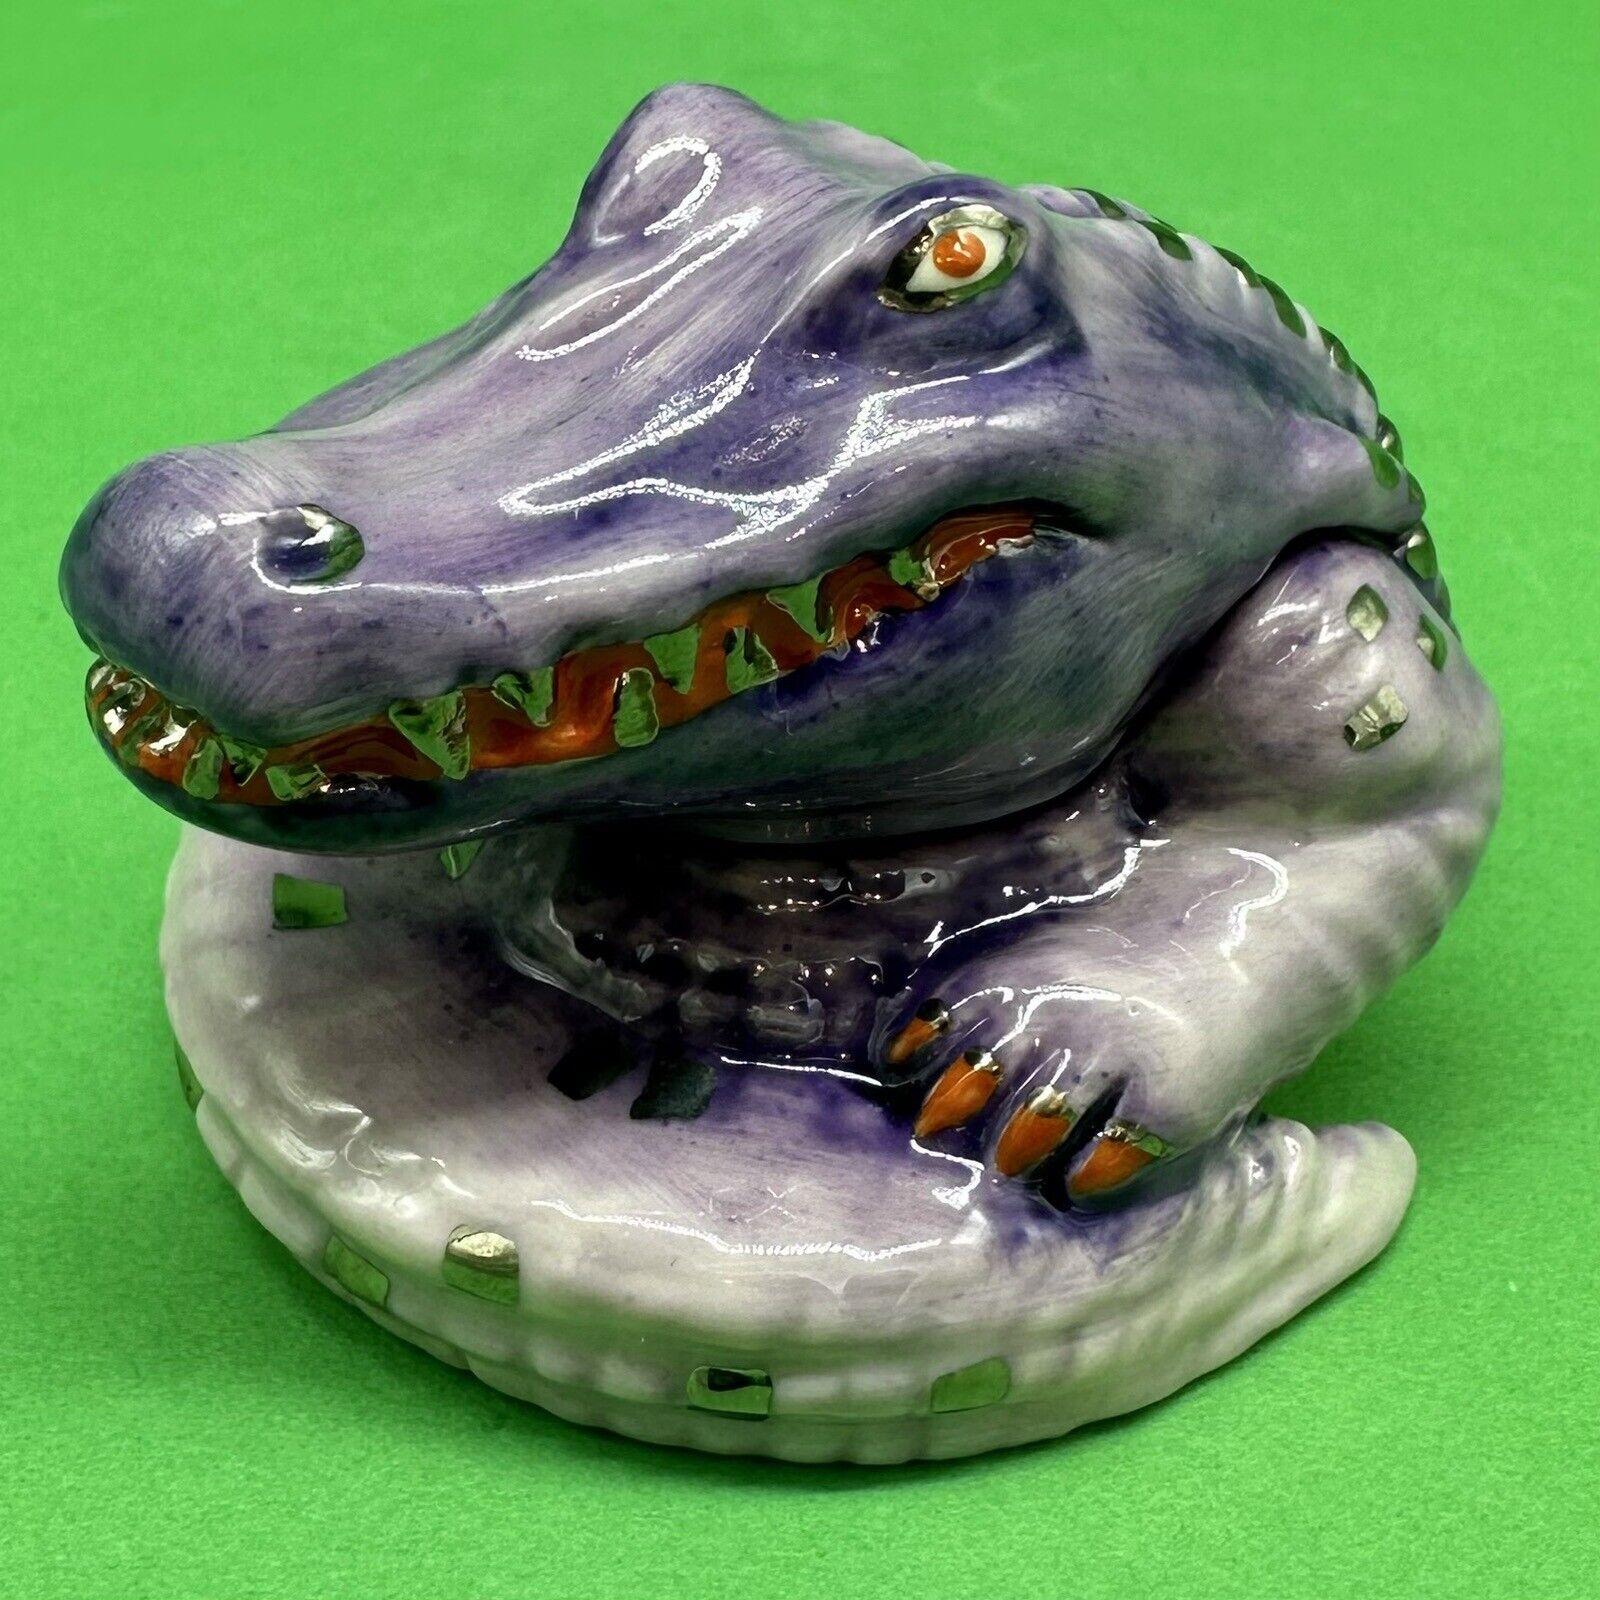 Kevin Francis Face Pots- The Florida Gator, 2007 Artist's Edition 1/1